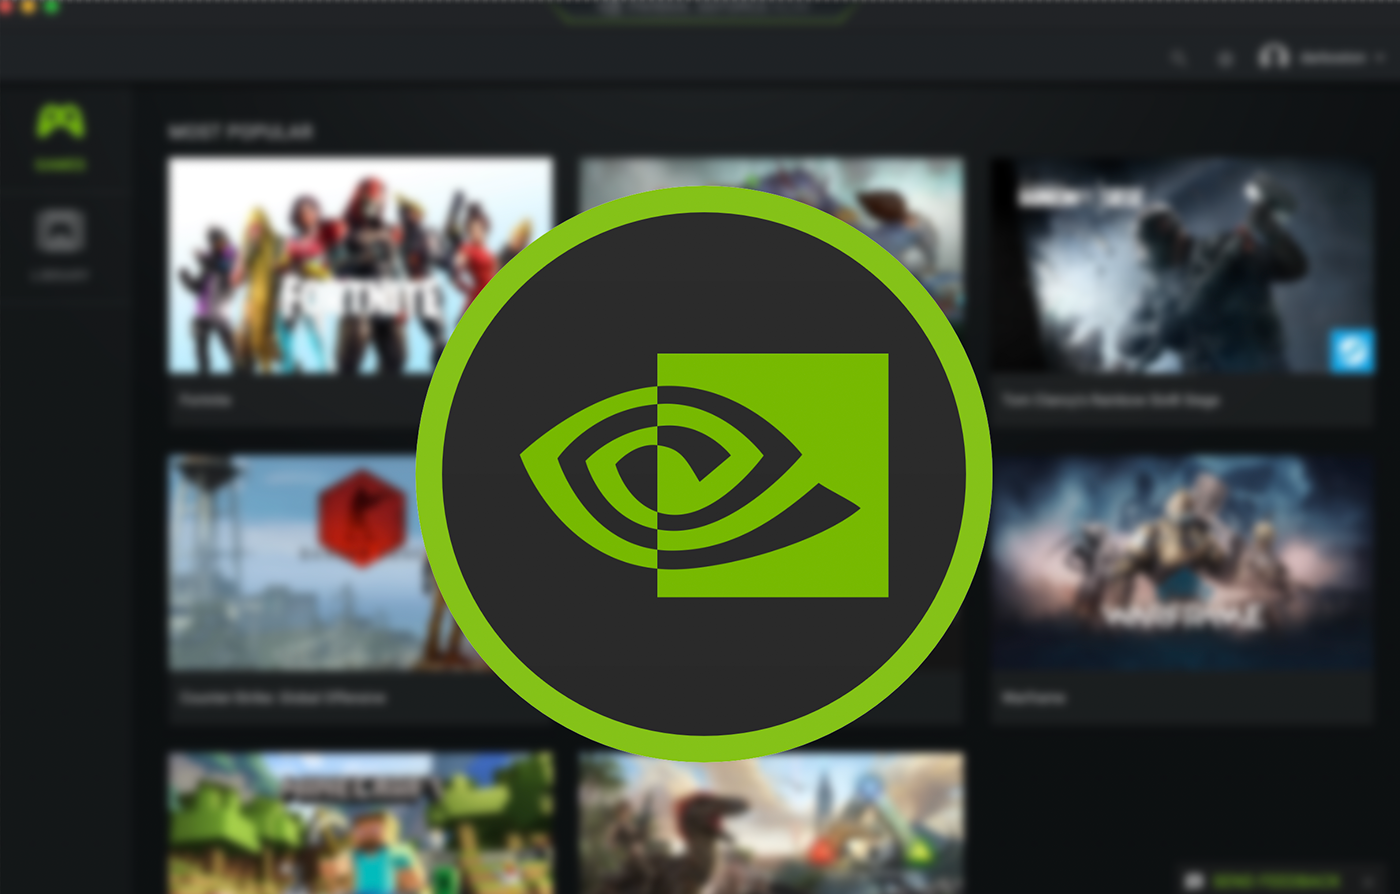 geforce now application